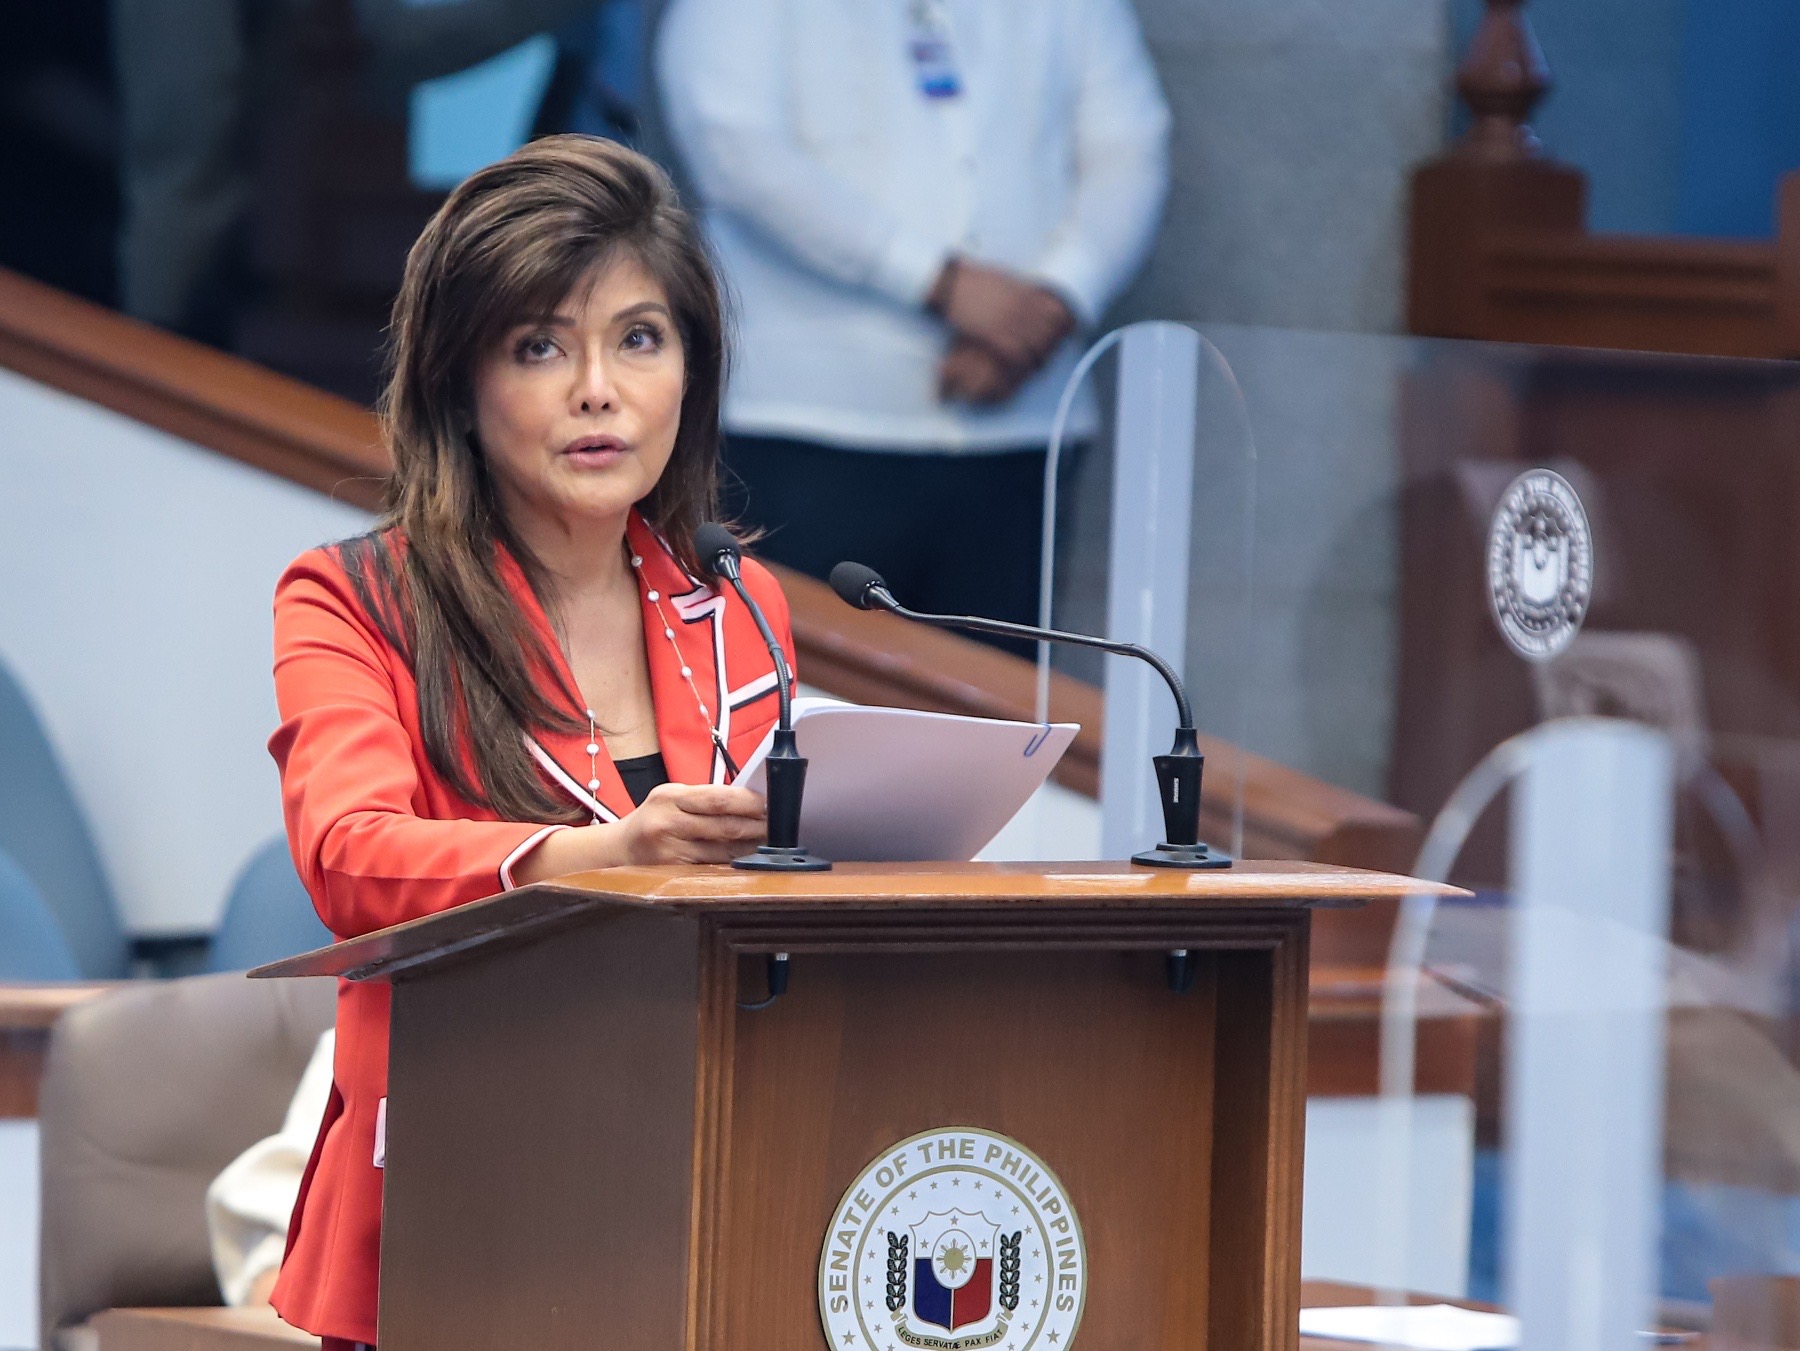 Senator Imee Marcos recalled on Wednesday playing the “biggest part” in the campaign of her brother, President-elect Ferdinand “Bongbong” Marcos Jr.—forming his tandem with Vice President-elect Sara Duterte-Carpio.